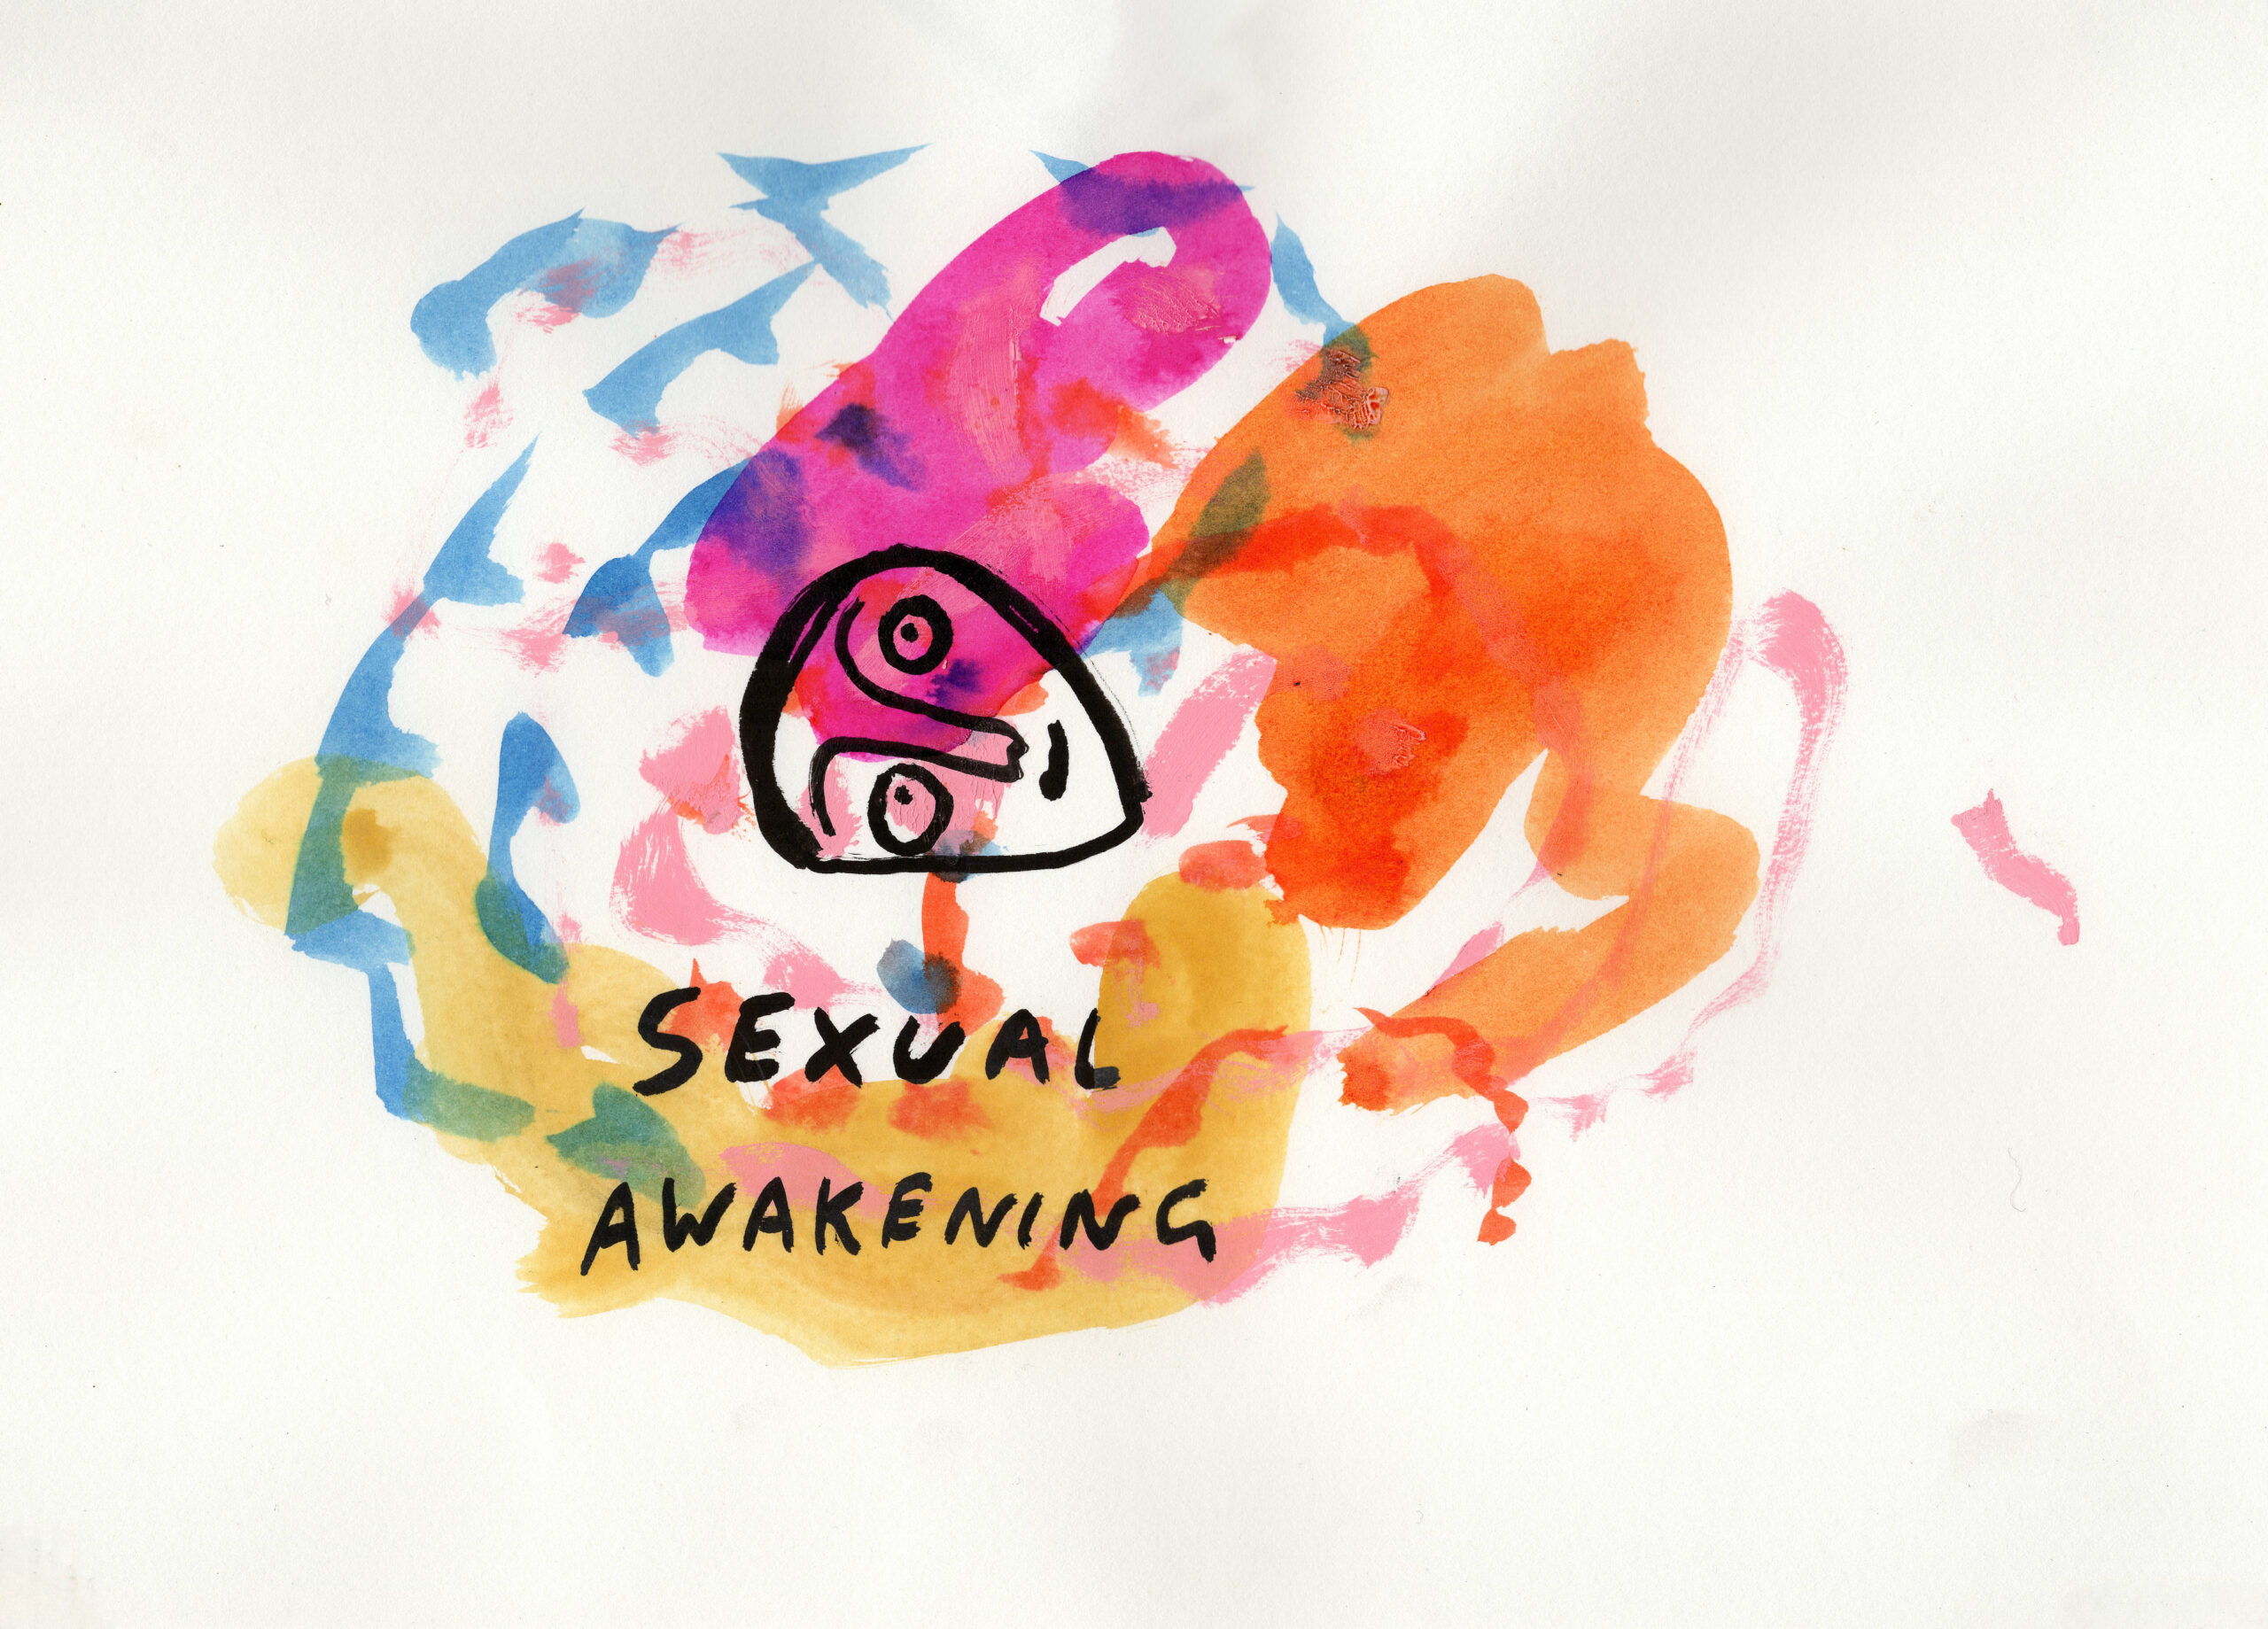 Water colour pen drawing showing a background of orange, pink and yellow areas with the outline of a head that could be lying down. Underneath the head are the words 'sexual awakening'.